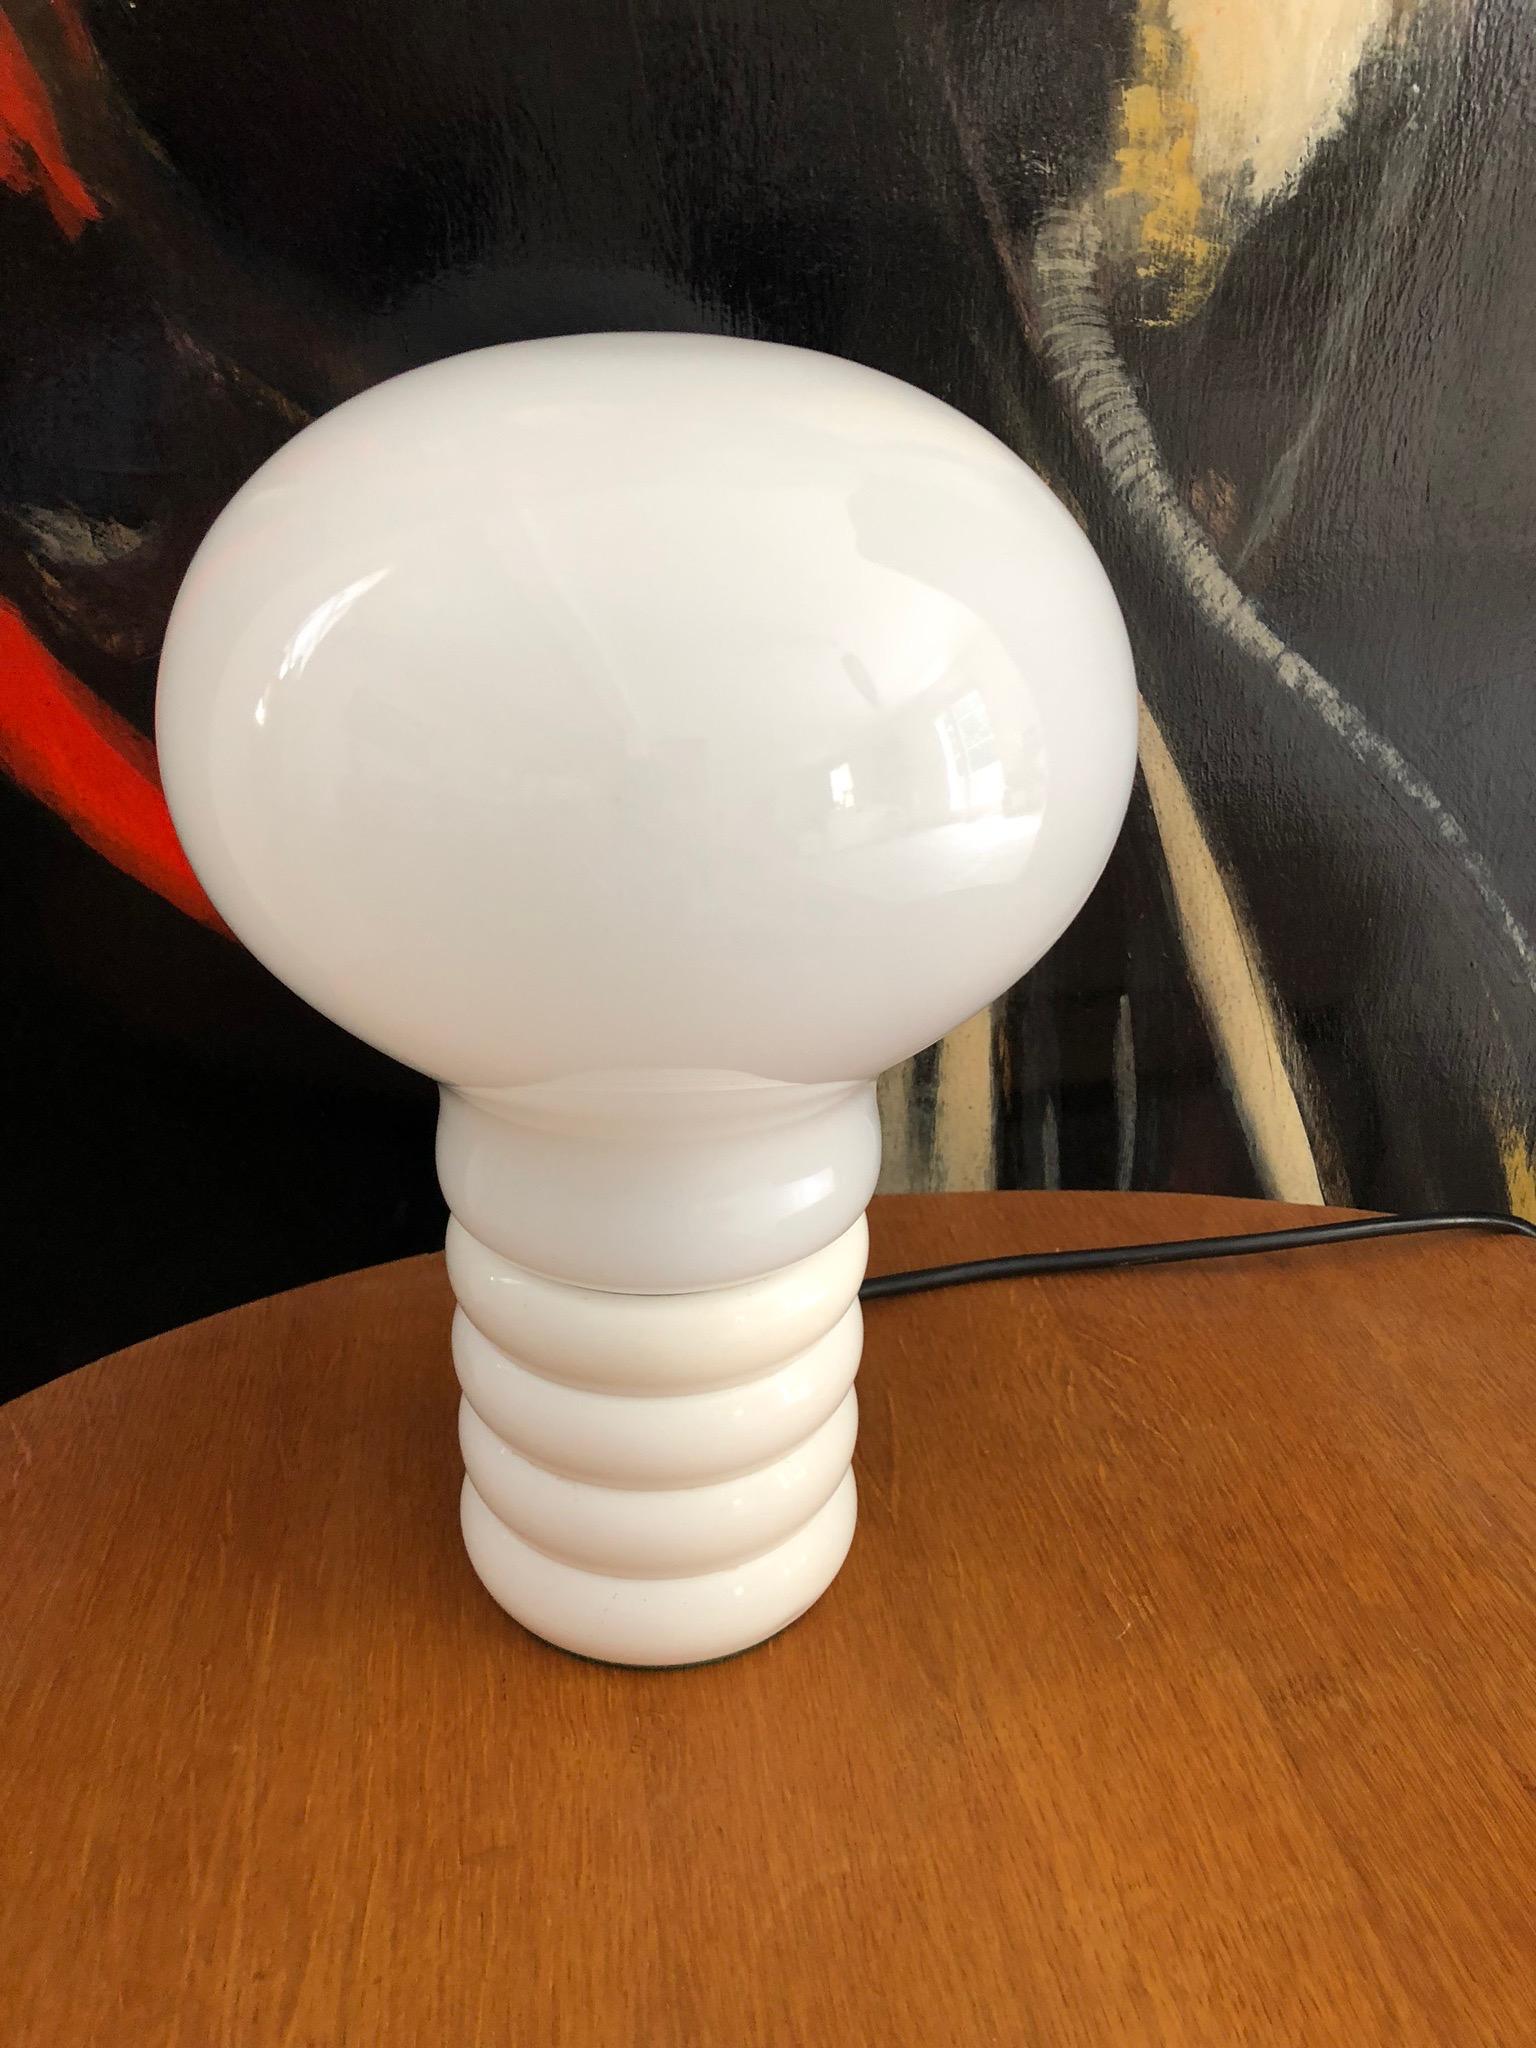 Rare and original table lamp by Ingo Maurer designed in the 1966. Base in white lacquered metal, opaline glass and white. Really good condition.